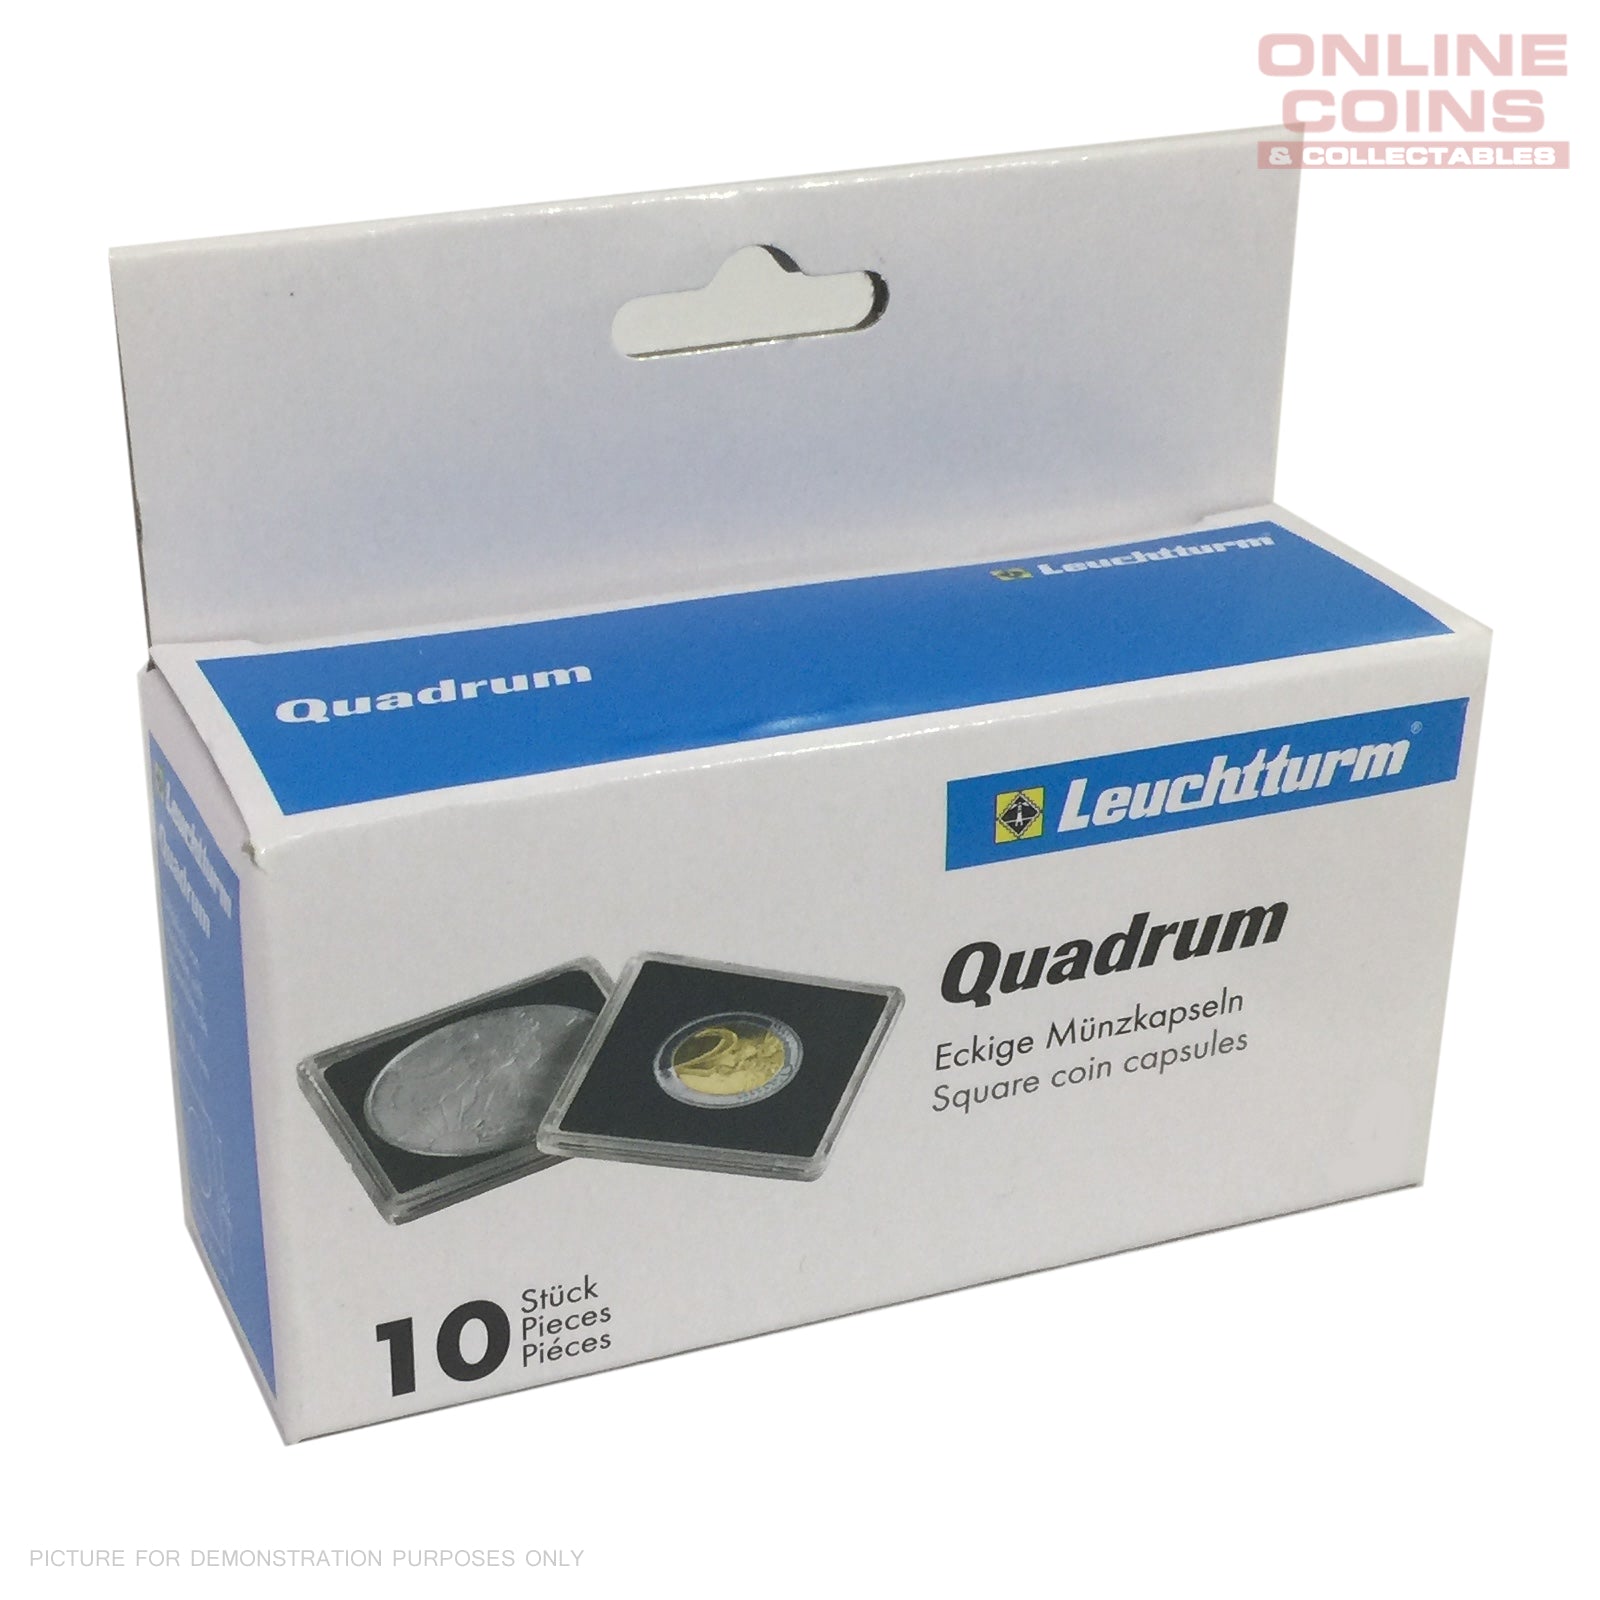 Lighthouse - Quadrum Square Coin Capsules 10 Pack - From 14 to 41 mm